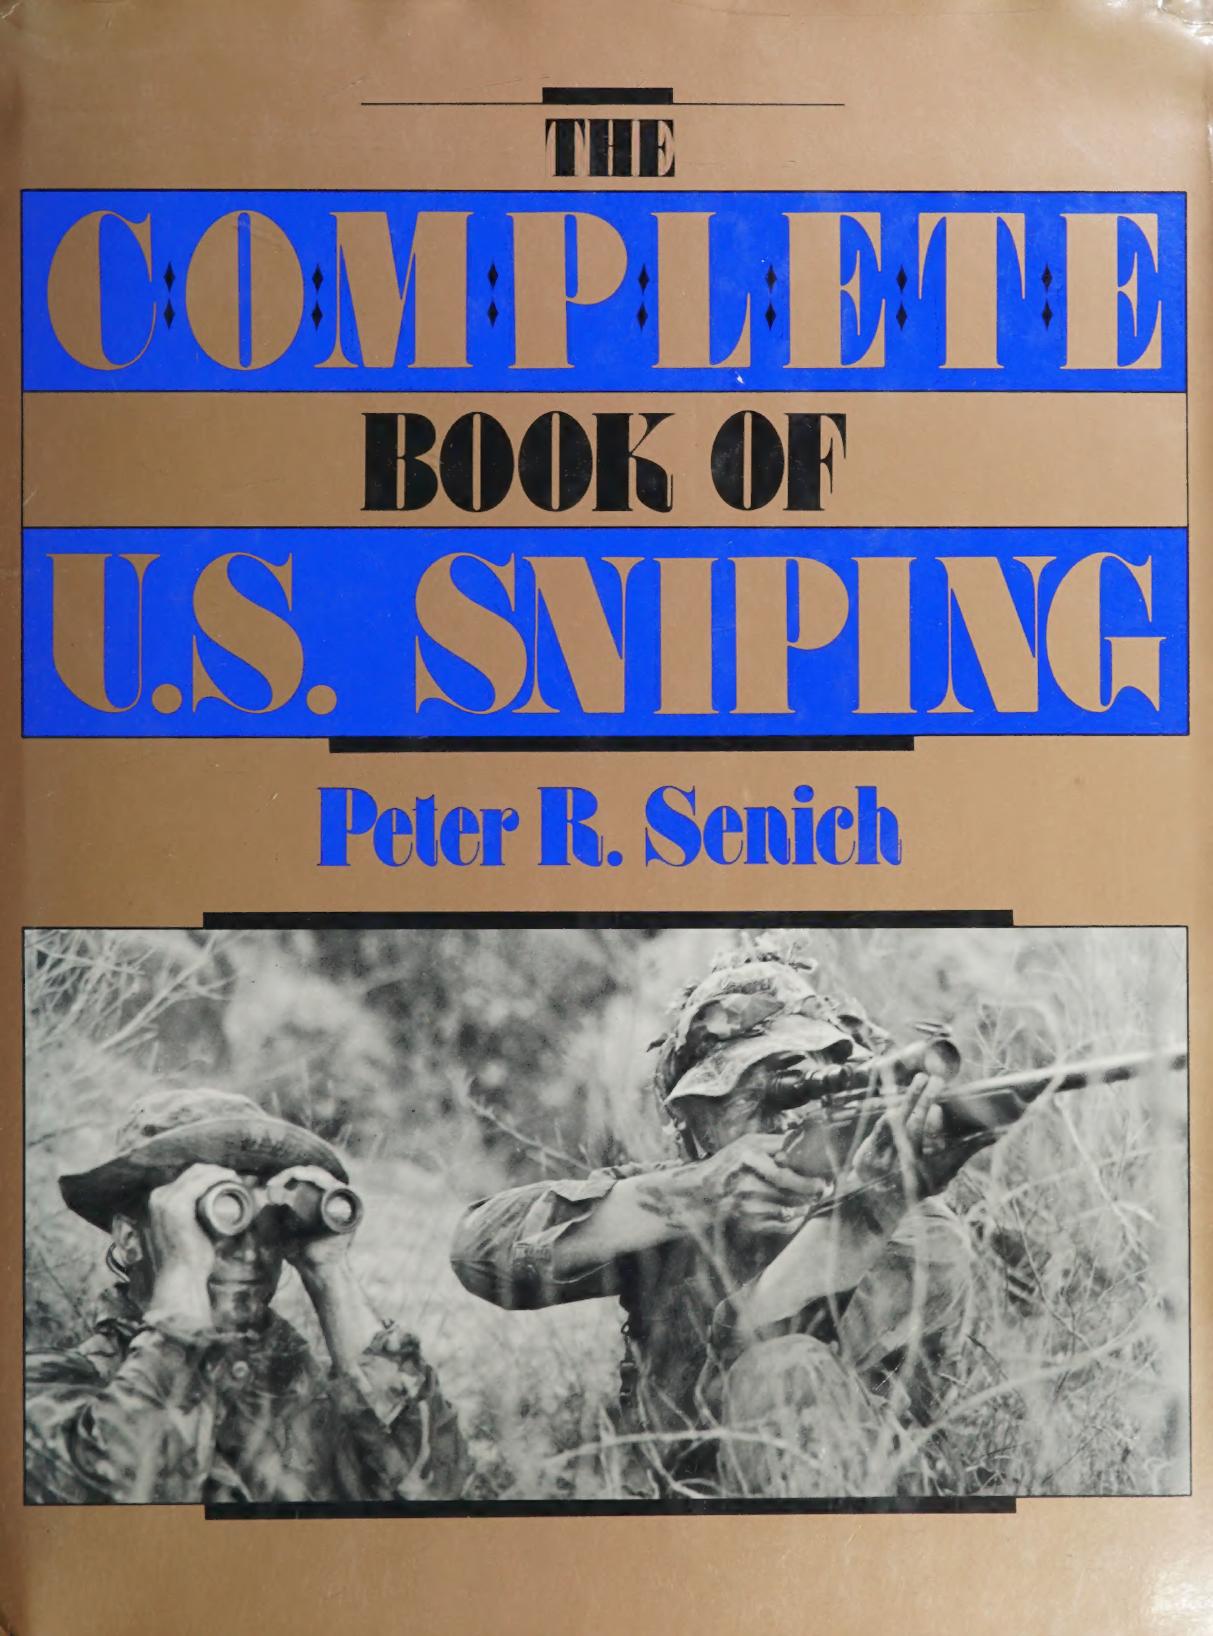 The Complete Book of U.S. Sniping by Peter R. Senich